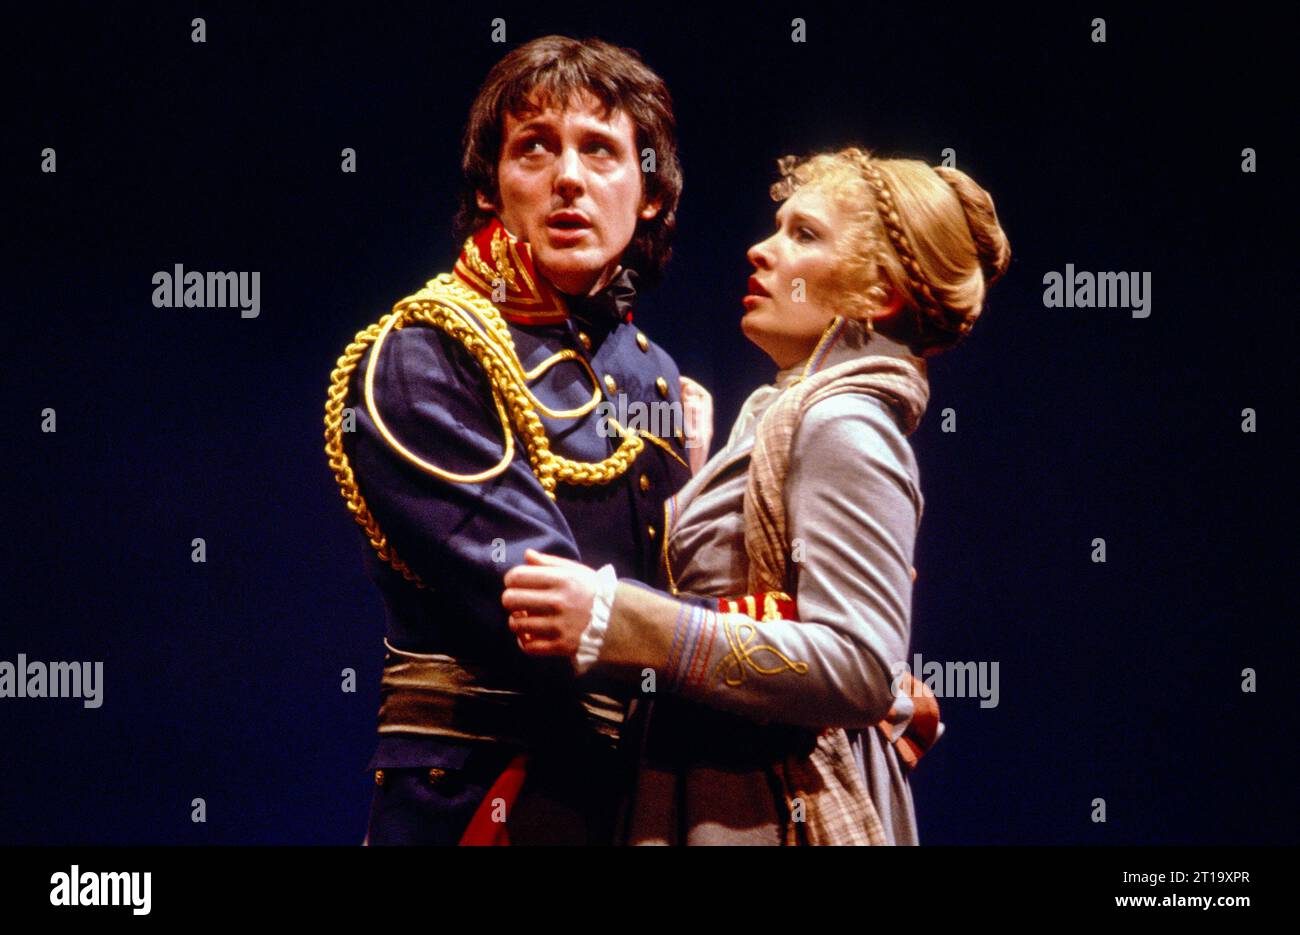 Patrick Drury (Prince Friedrich Arthur of Homburg), Lindsay Duncan (Princess Natalie of Orange) in THE PRINCE OF HOMBURG by Heinrich von Kleist at the Cottesloe Theatre, National Theatre (NT), London SE1  22/04/1982  in a version by John James  design: Alison Chitty  lighting: Stephen Wentworth  director: John Burgess Stock Photo